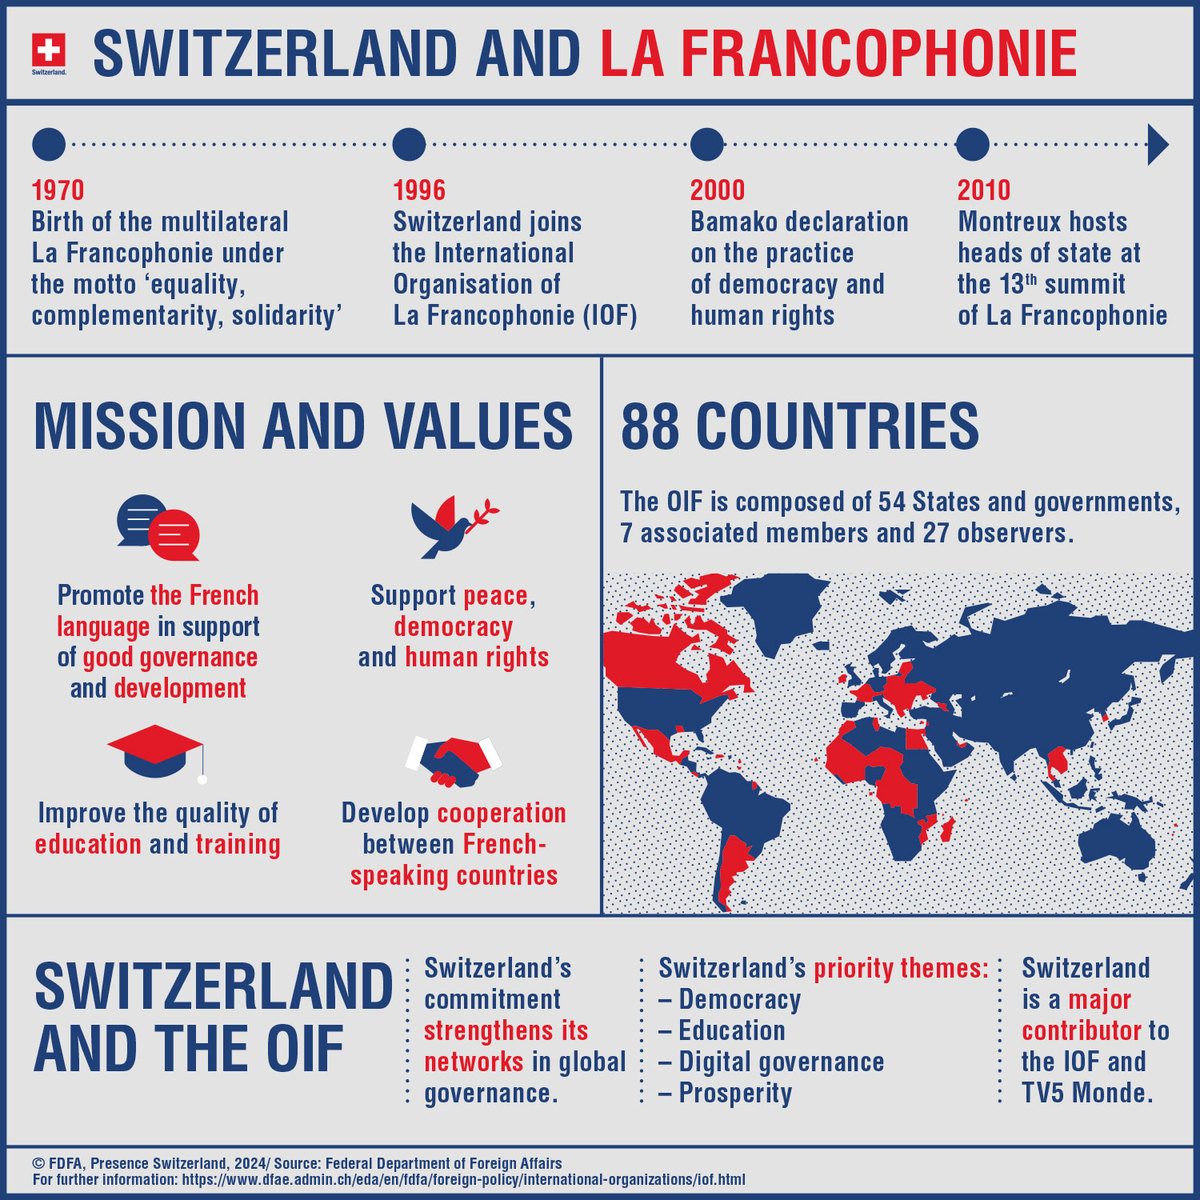 Bonne journée de la #Francophonie! Today we are celebrating one of Switzerland's national languages. Did you know that🇨🇭 is very active in promoting #French and #multilingualism throughout the world?